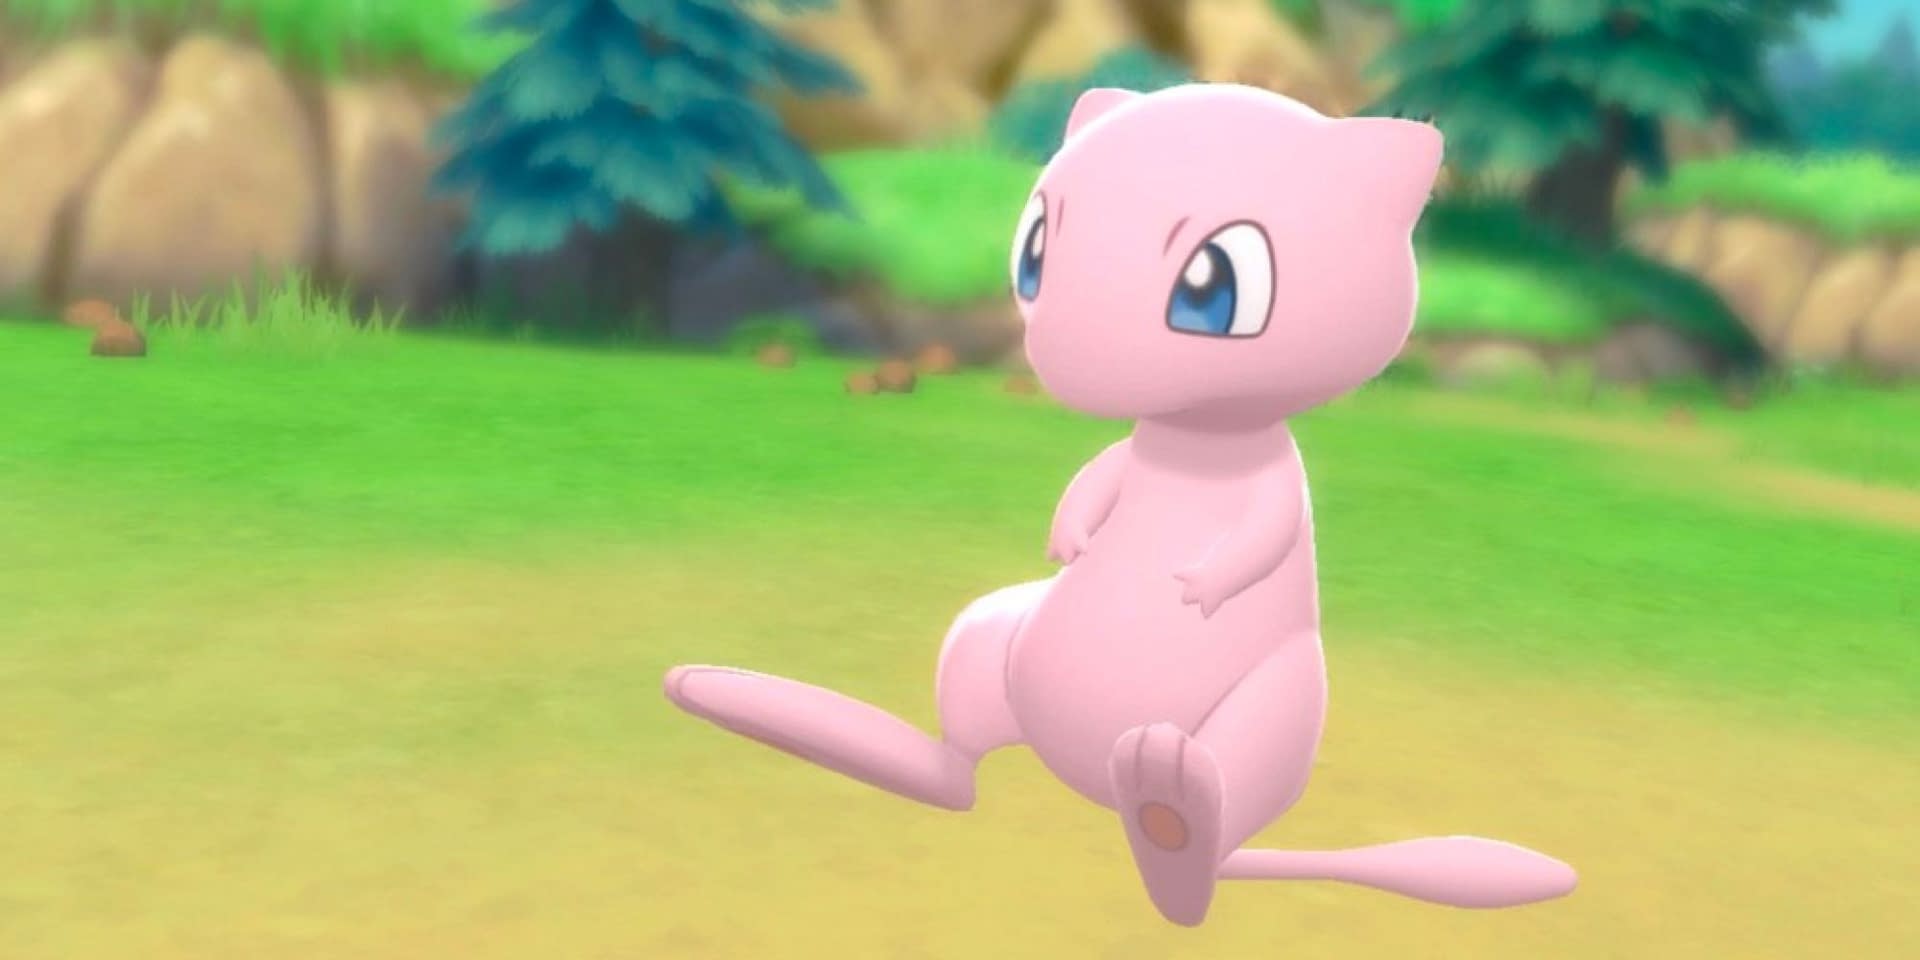 Get Mew and Jirachi in BDSP, Encounter Legendary Pokemon in